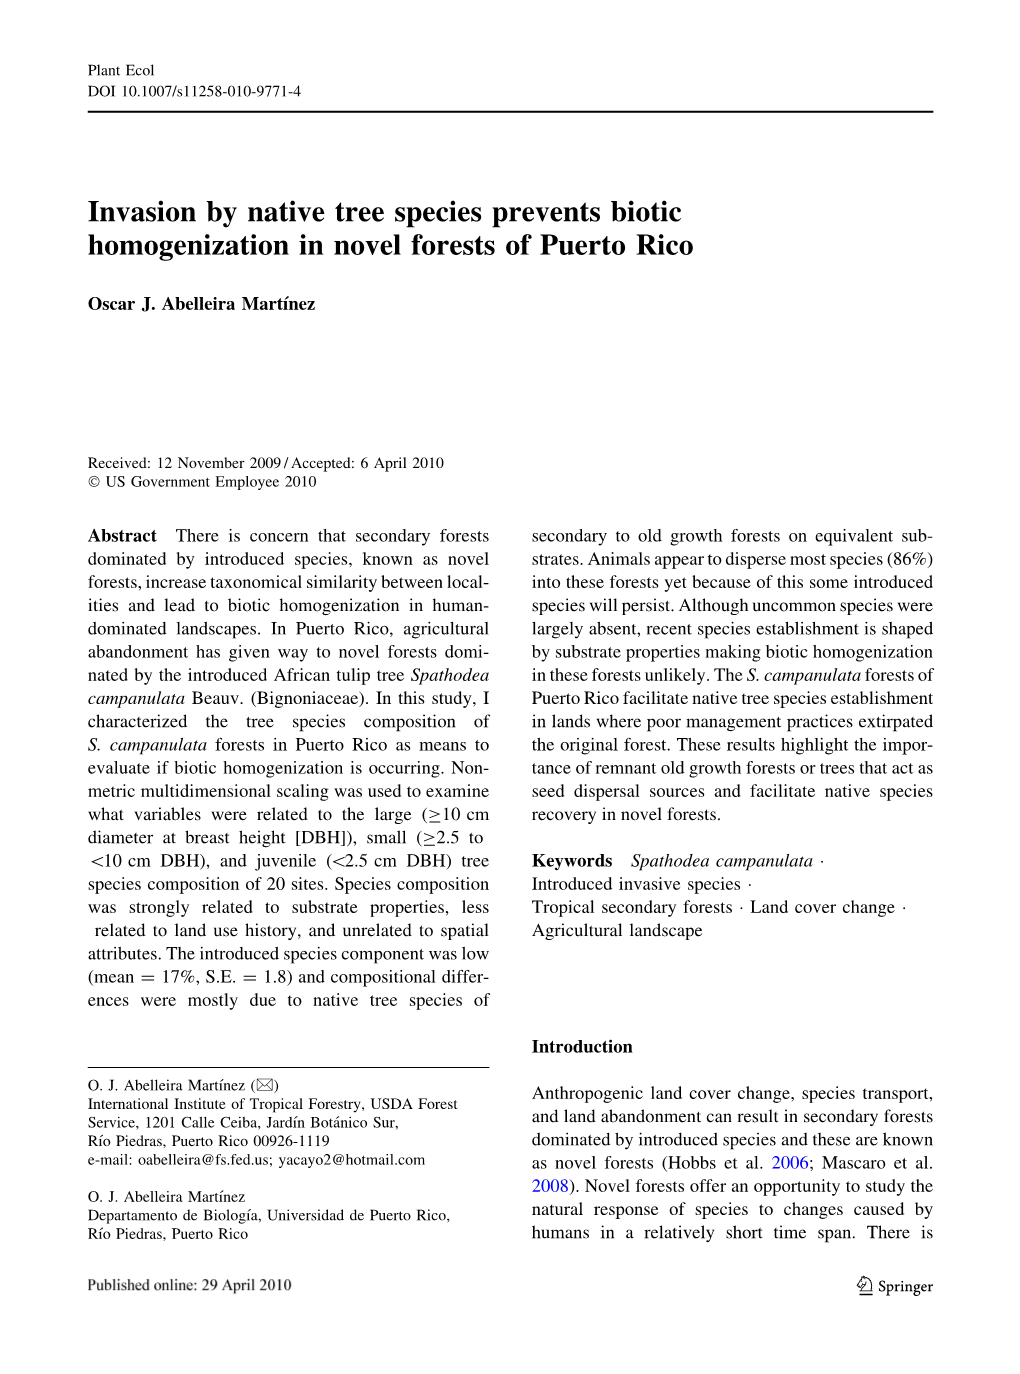 Invasion by Native Tree Species Prevents Biotic Homogenization in Novel Forests of Puerto Rico